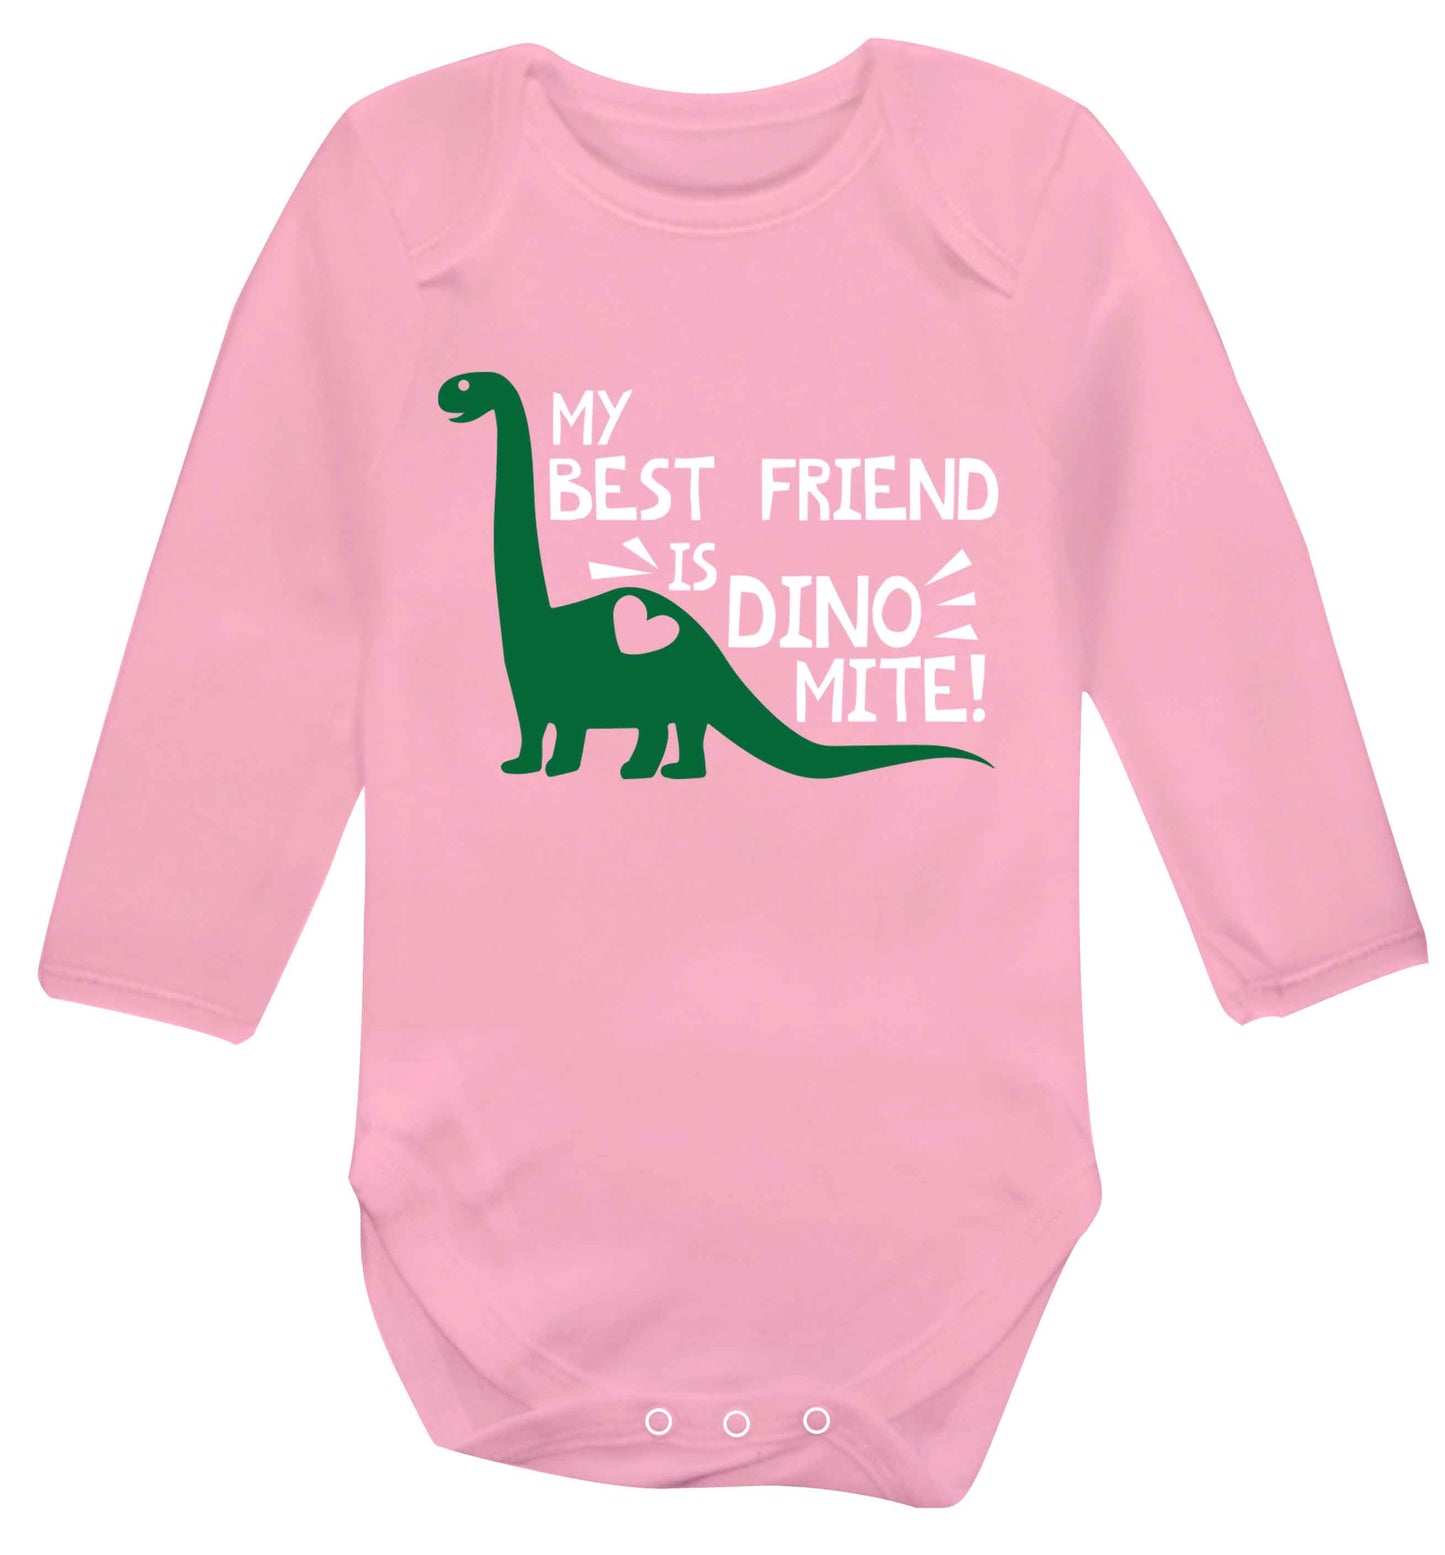 My best friend is dinomite! Baby Vest long sleeved pale pink 6-12 months